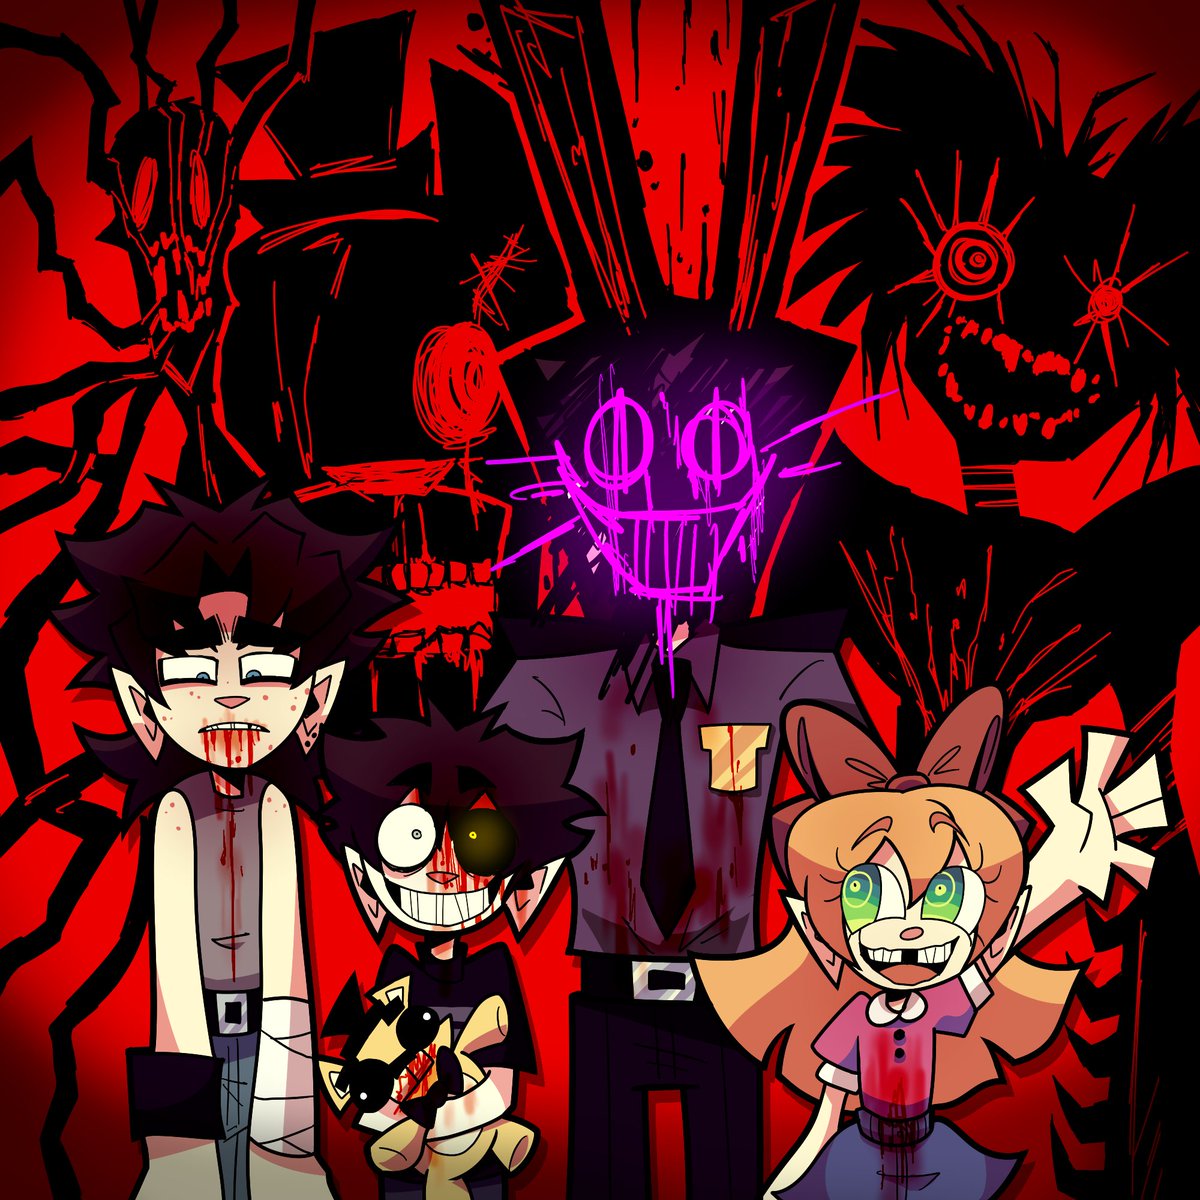 CW BLOOD AND IMPLIED CHILD DEATH

#fnafDIVERZION happy 1st year... another one... just because... i really like the afton family #fnaf #michaelafton #evanafton #williamafton #elizabethafton